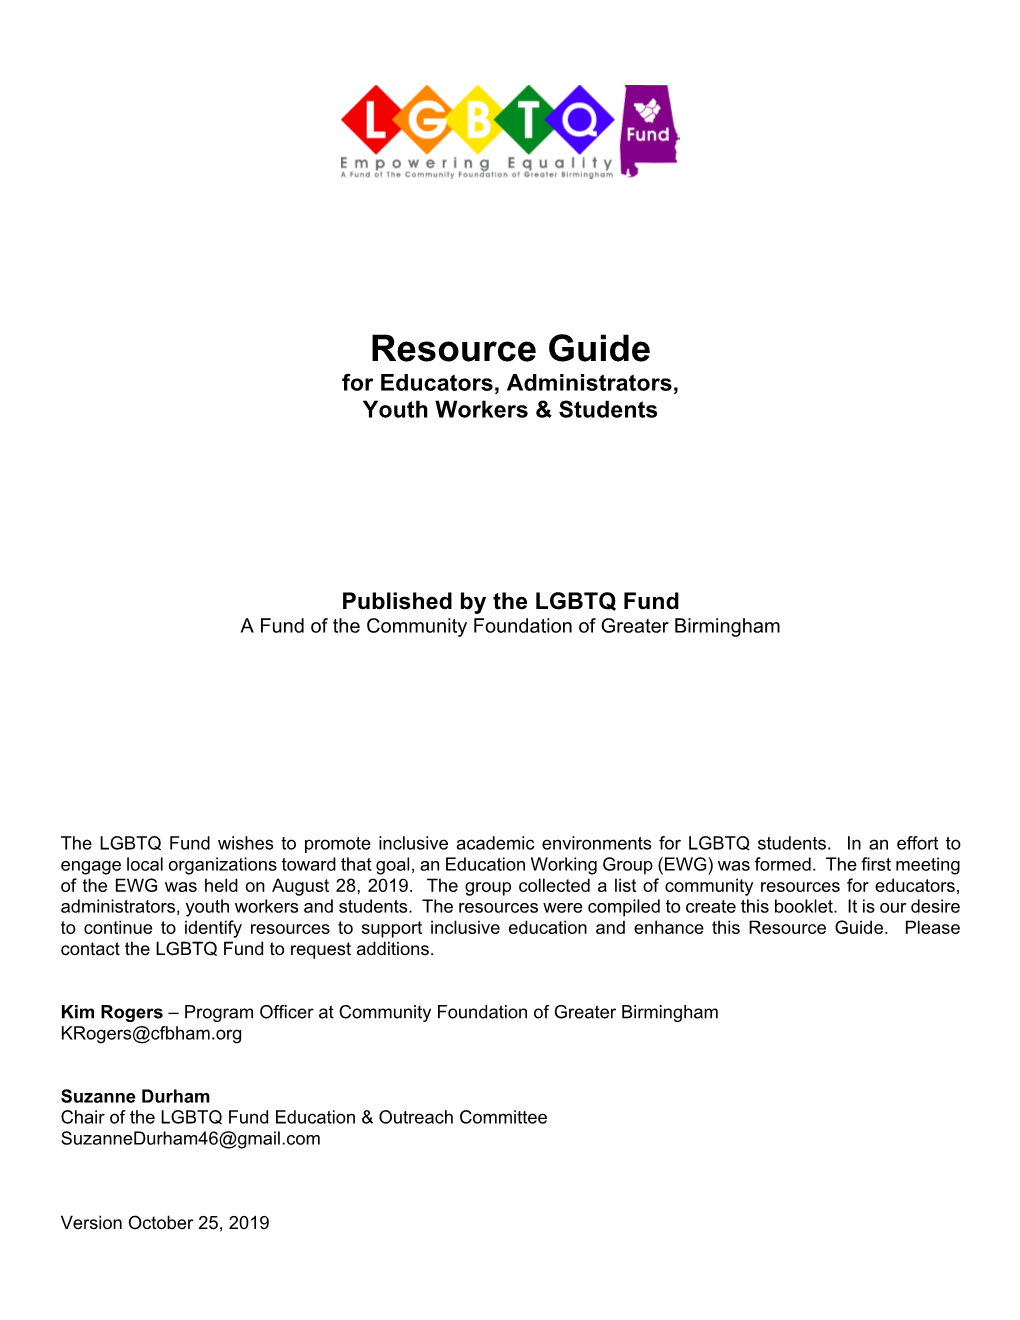 Resource Guide for Educators, Administrators, Youth Workers & Students